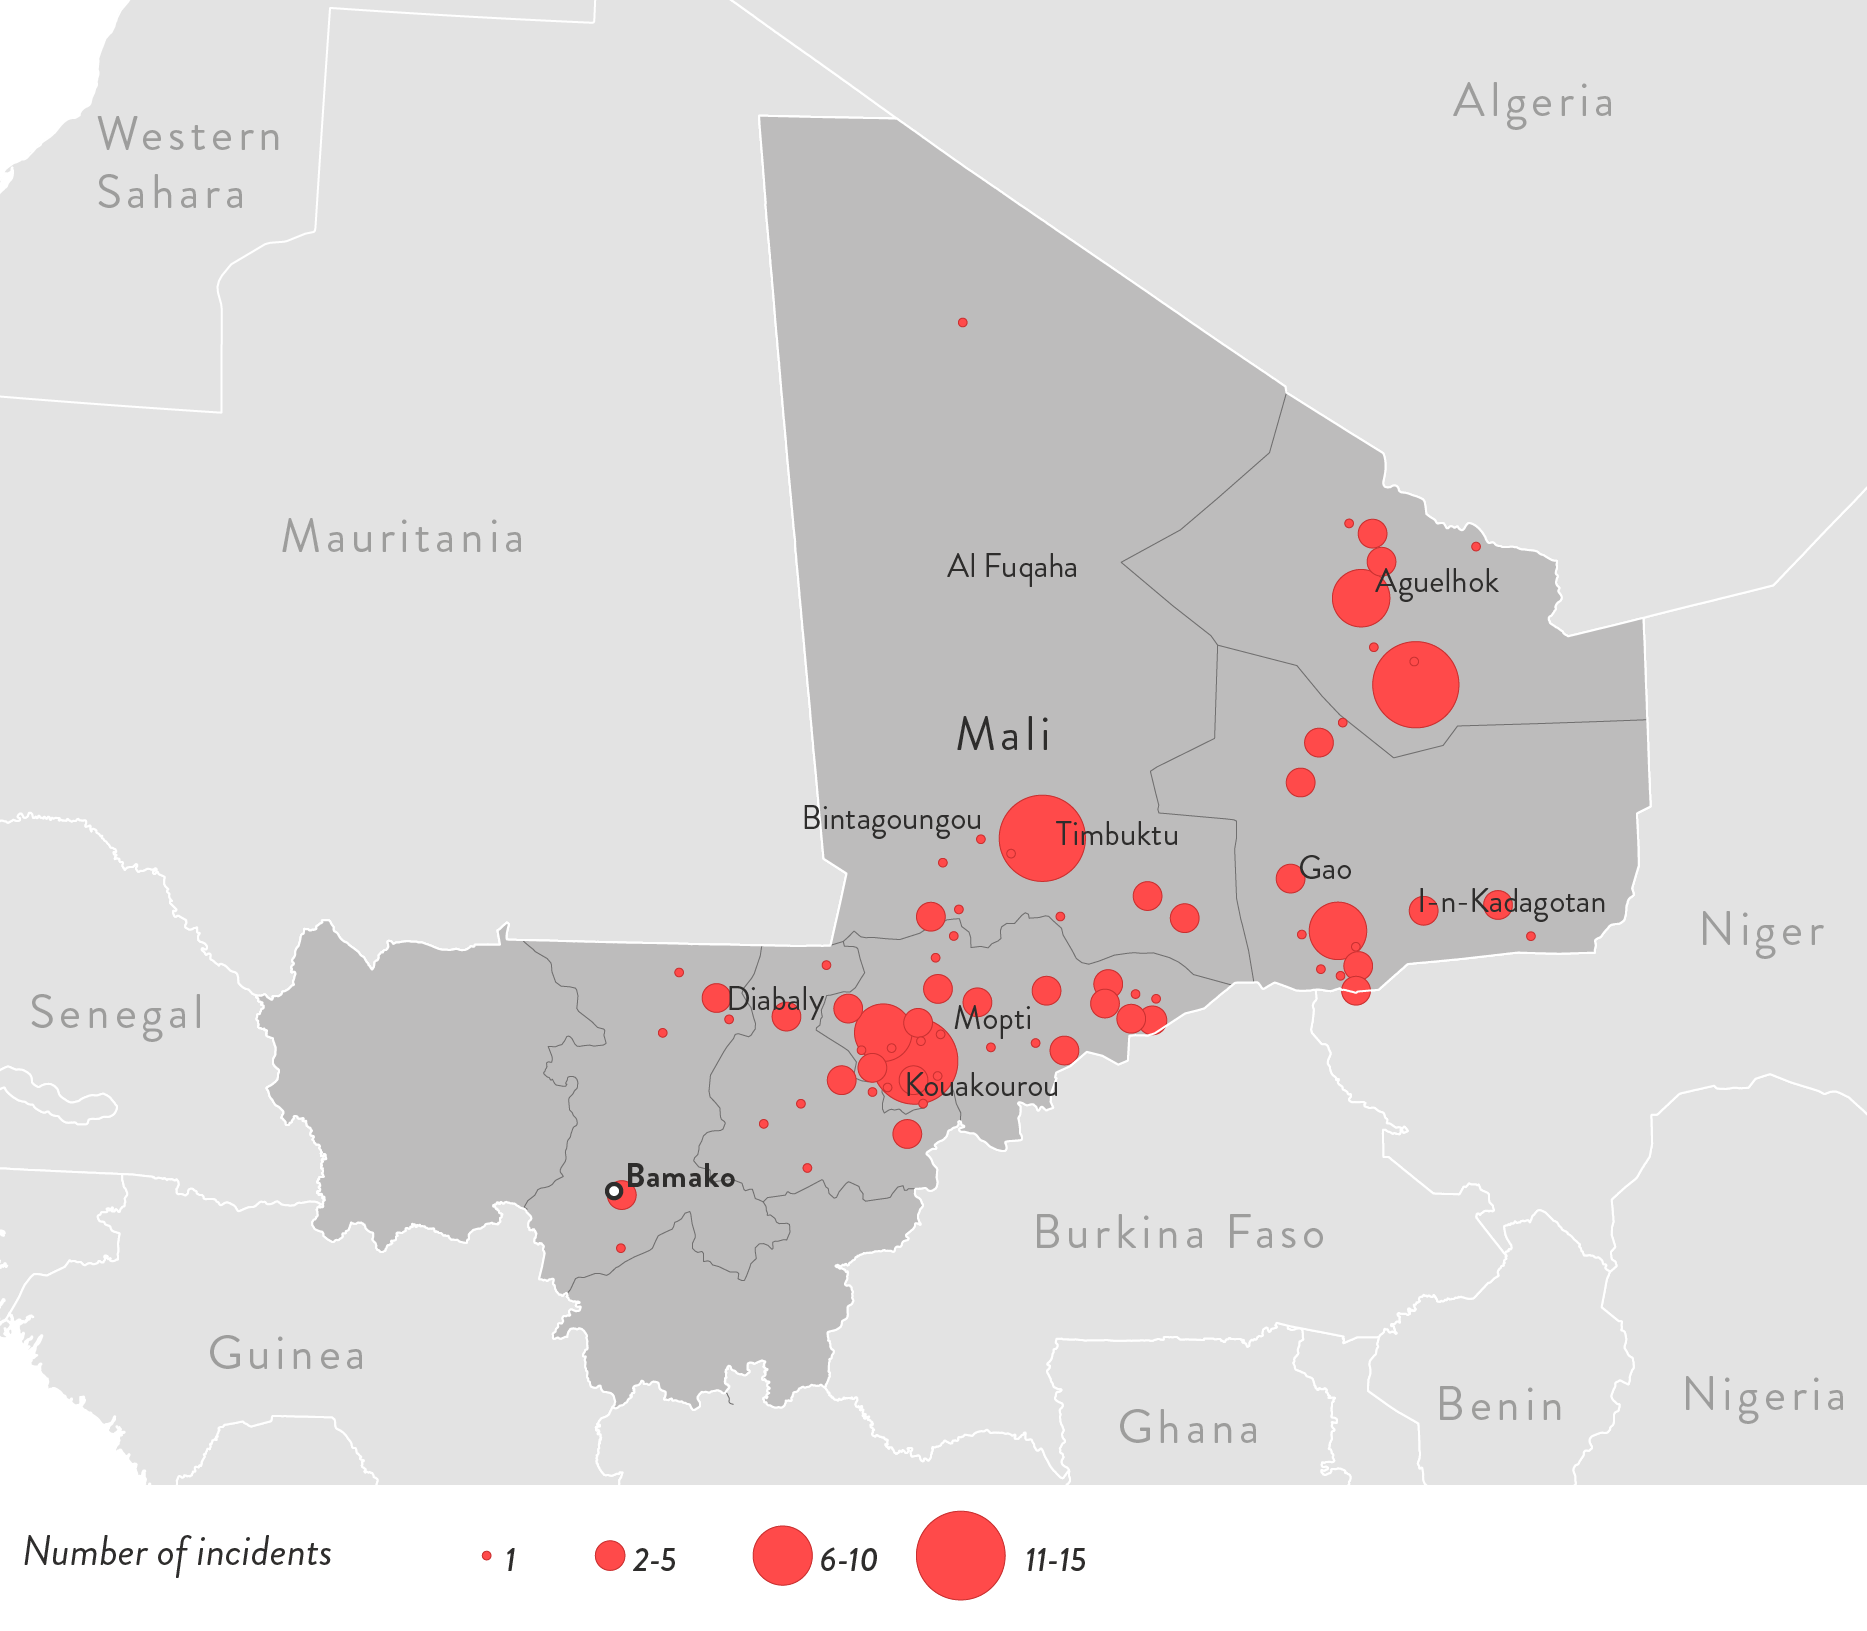 islamist-extremism-2017-ten-deadliest-countries - Figure 2.28: Map of Violent Islamist Incidents and Counter-Measures in Mali, 2017